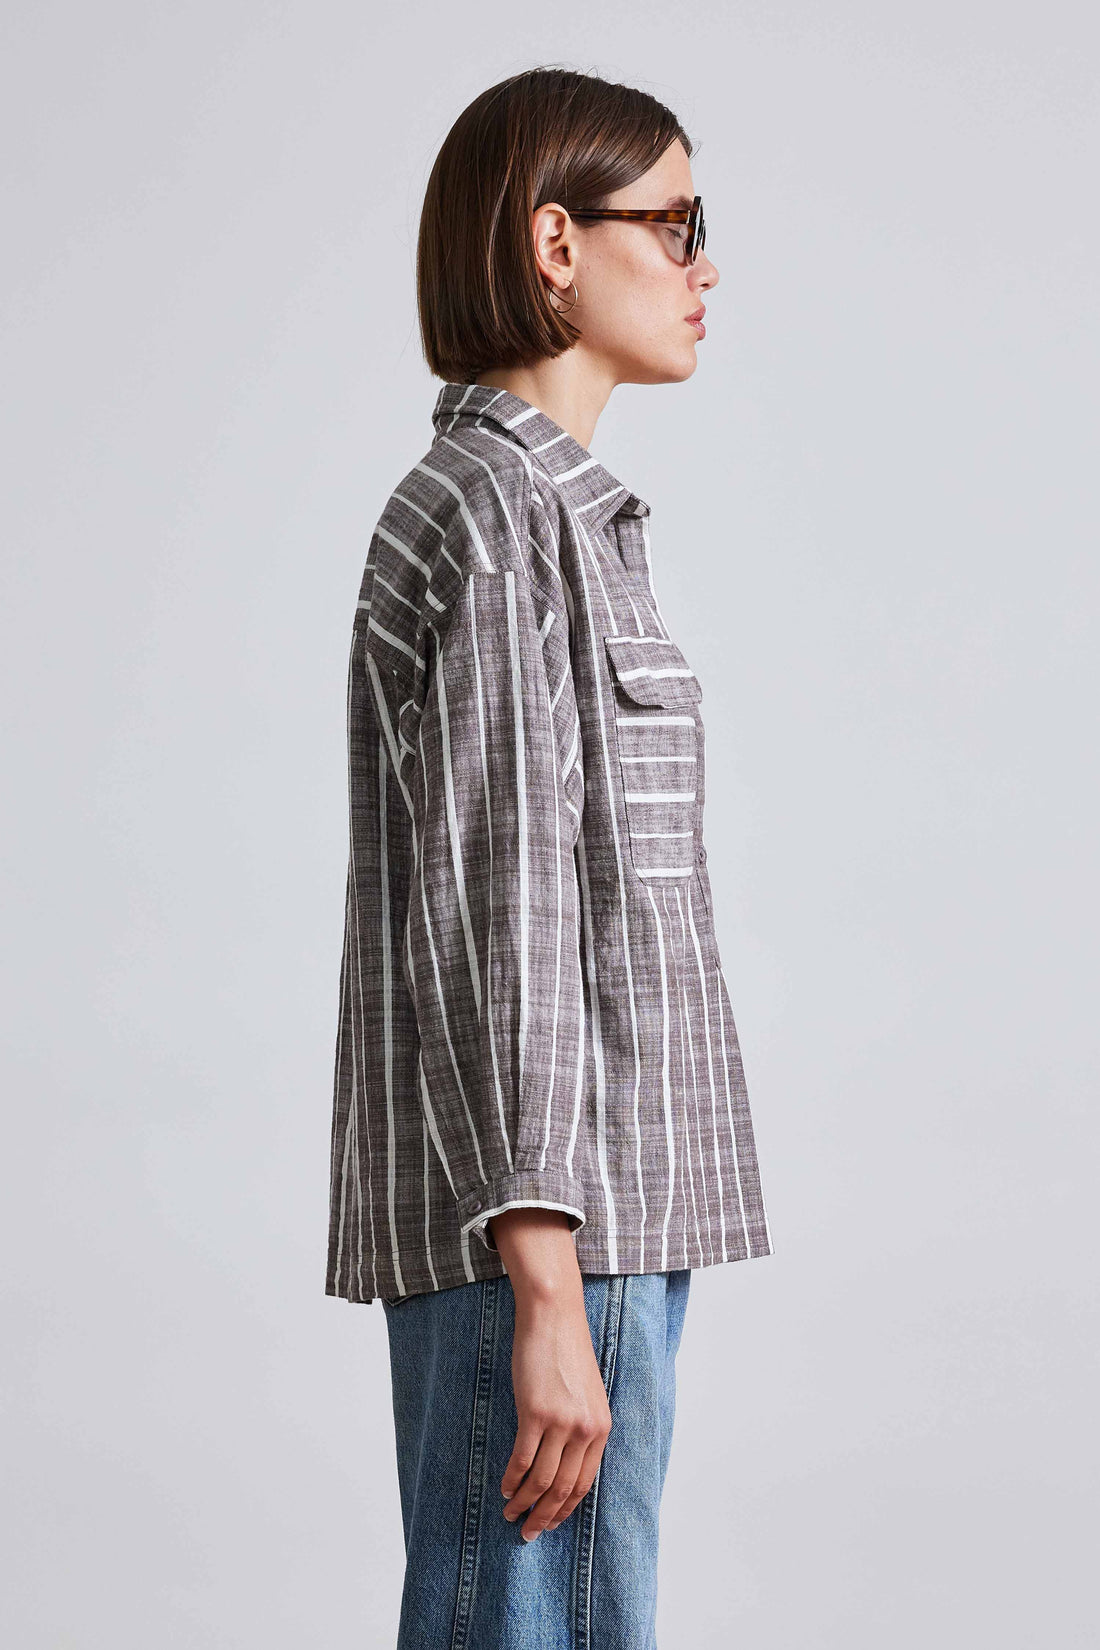 Kava Button Up Popover